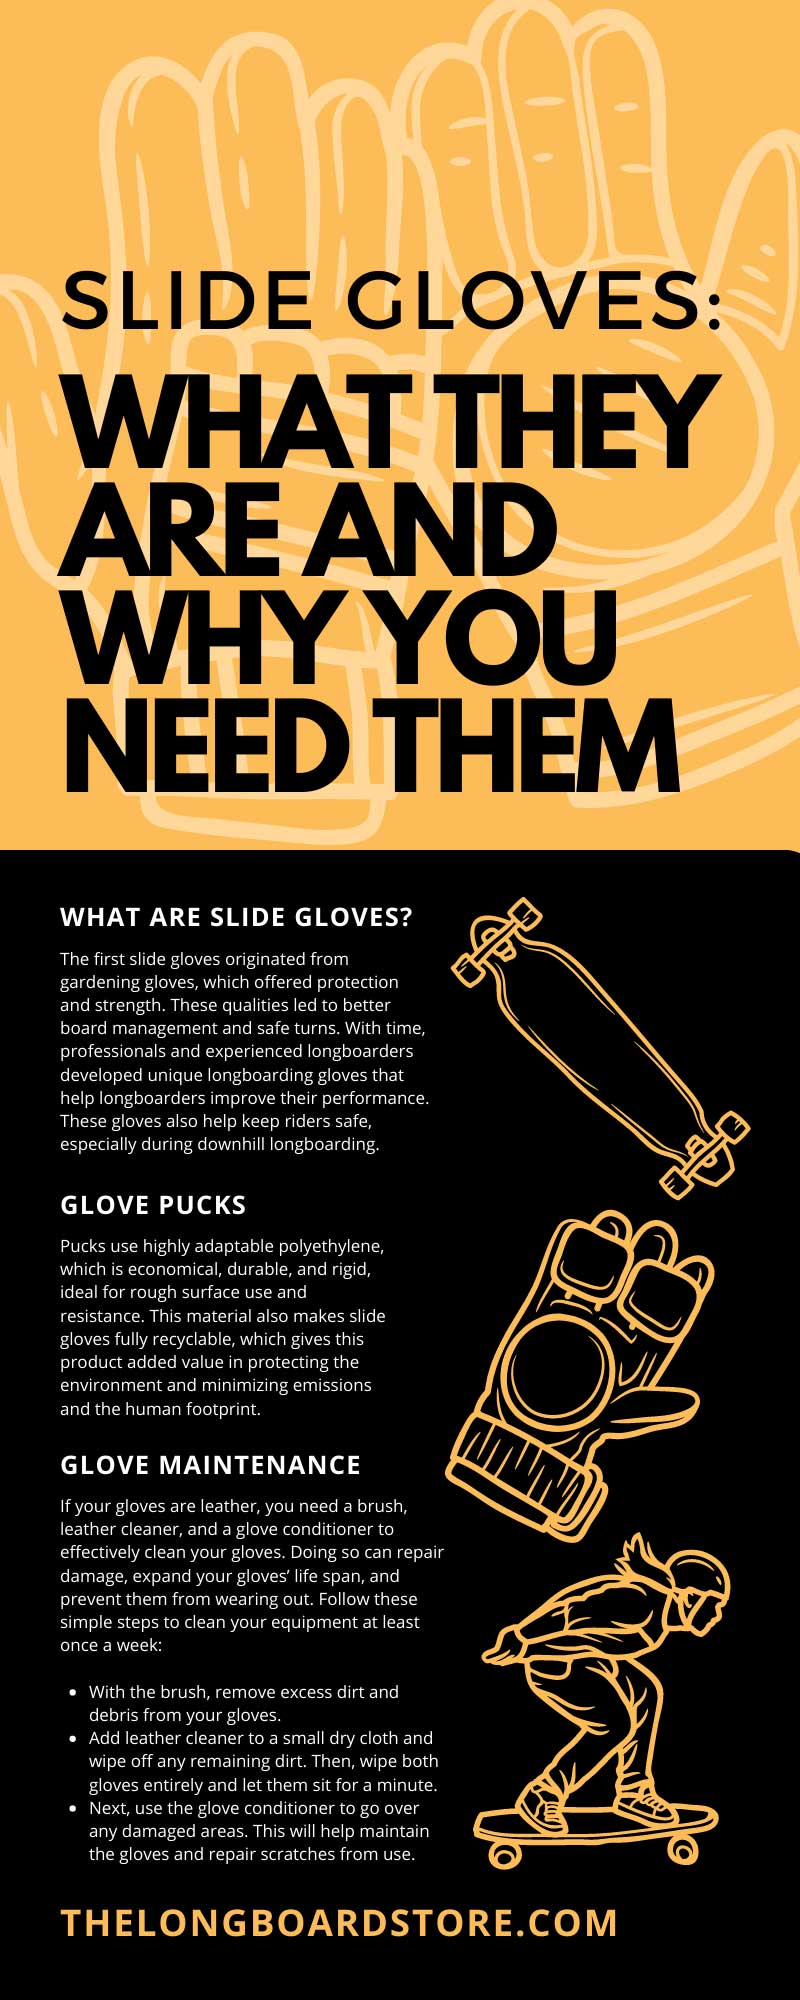 Slide Gloves: What They Are and Why You Need Them